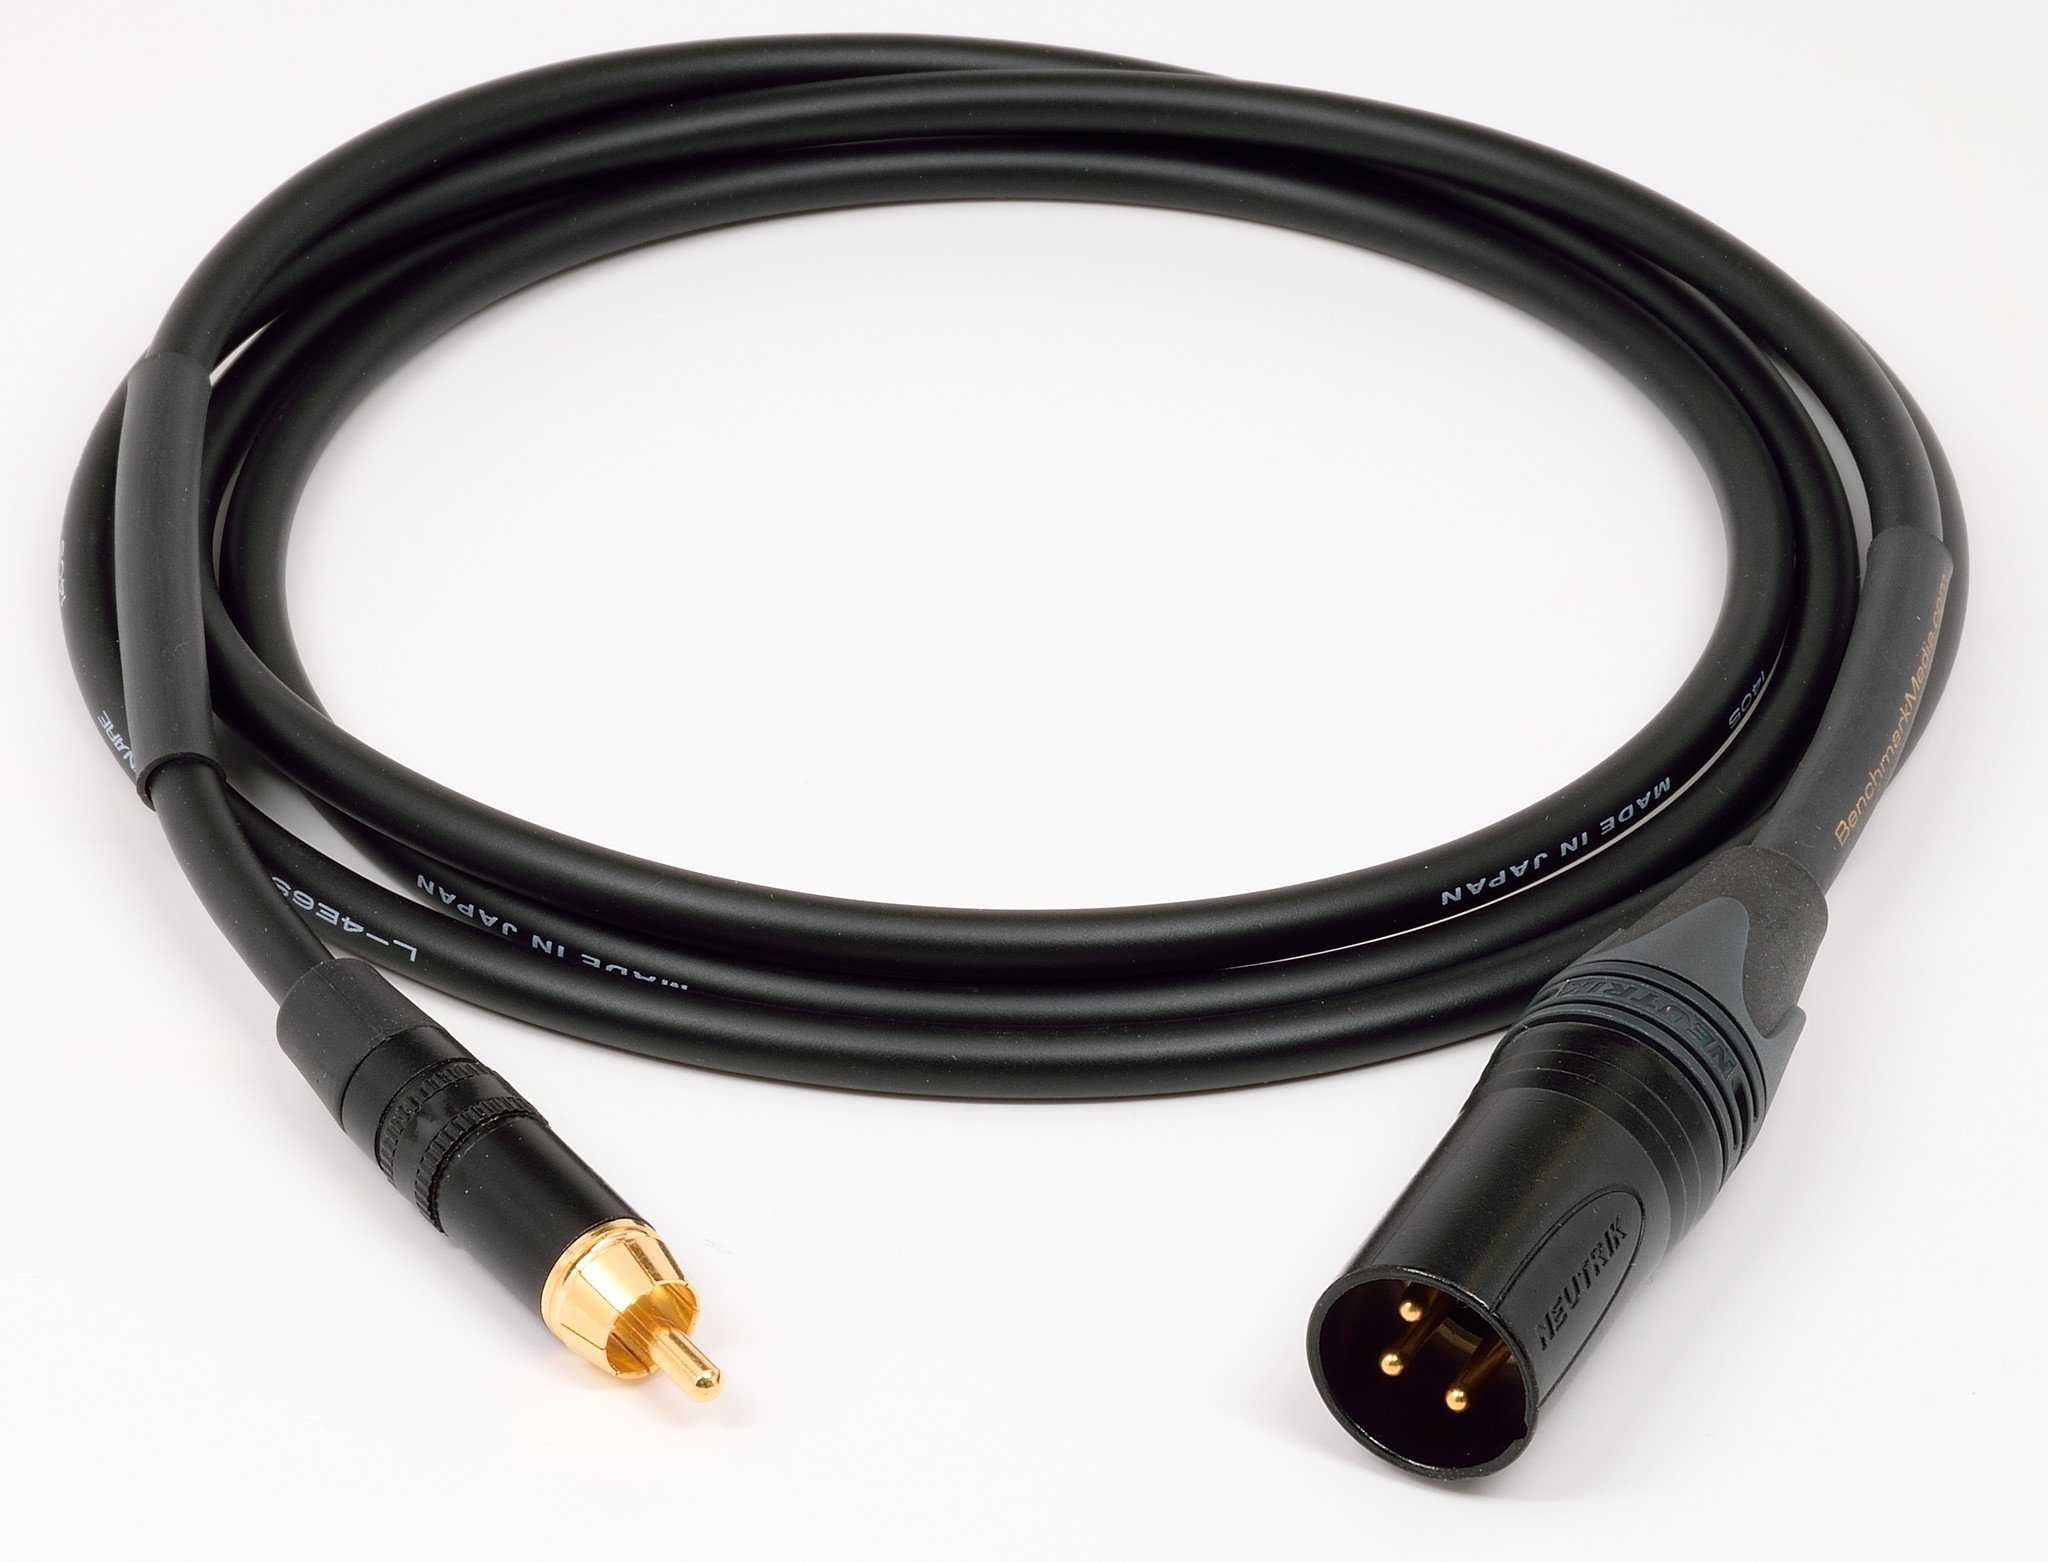 Benchmark RCA to XLRM Adapter Cable for Analog Audio - pin 3 to RCA ...